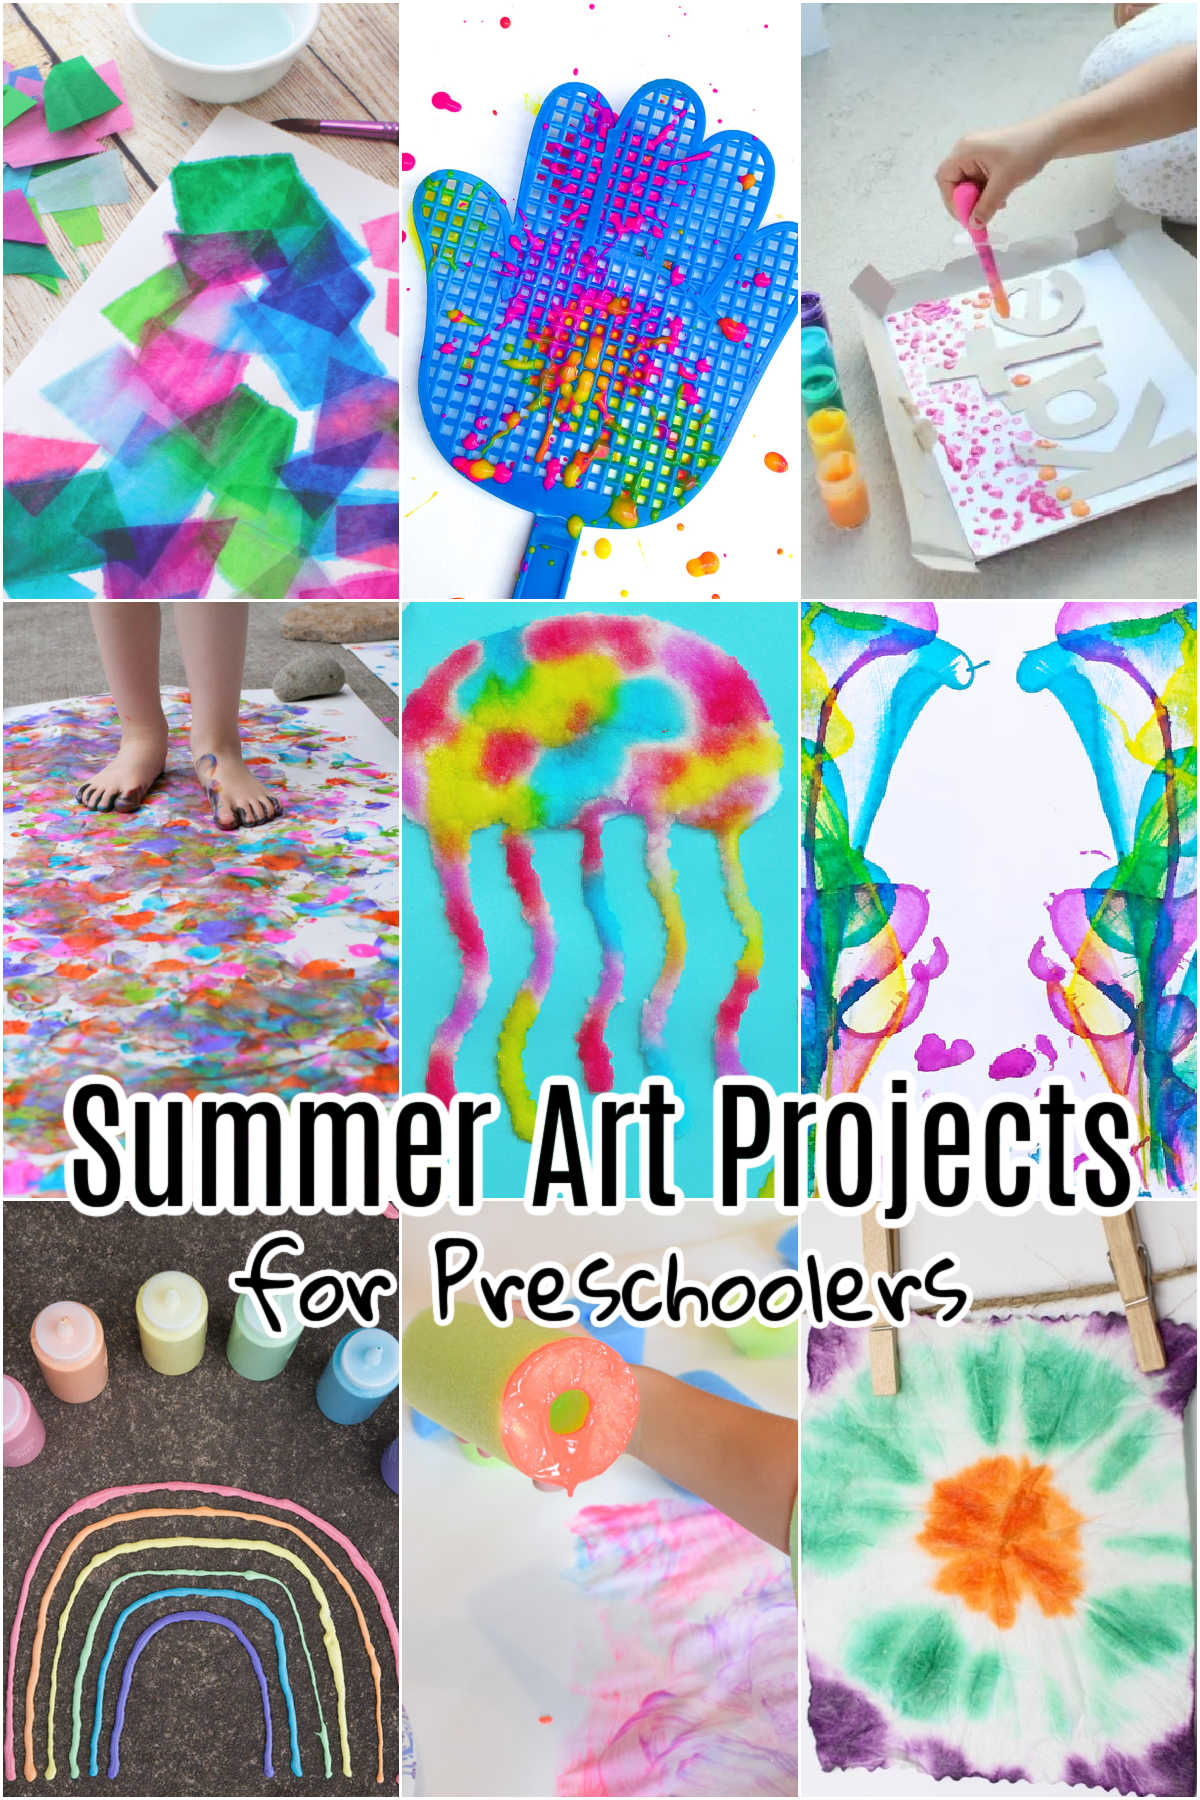 Collage of Summer Art Projects for Preschoolers